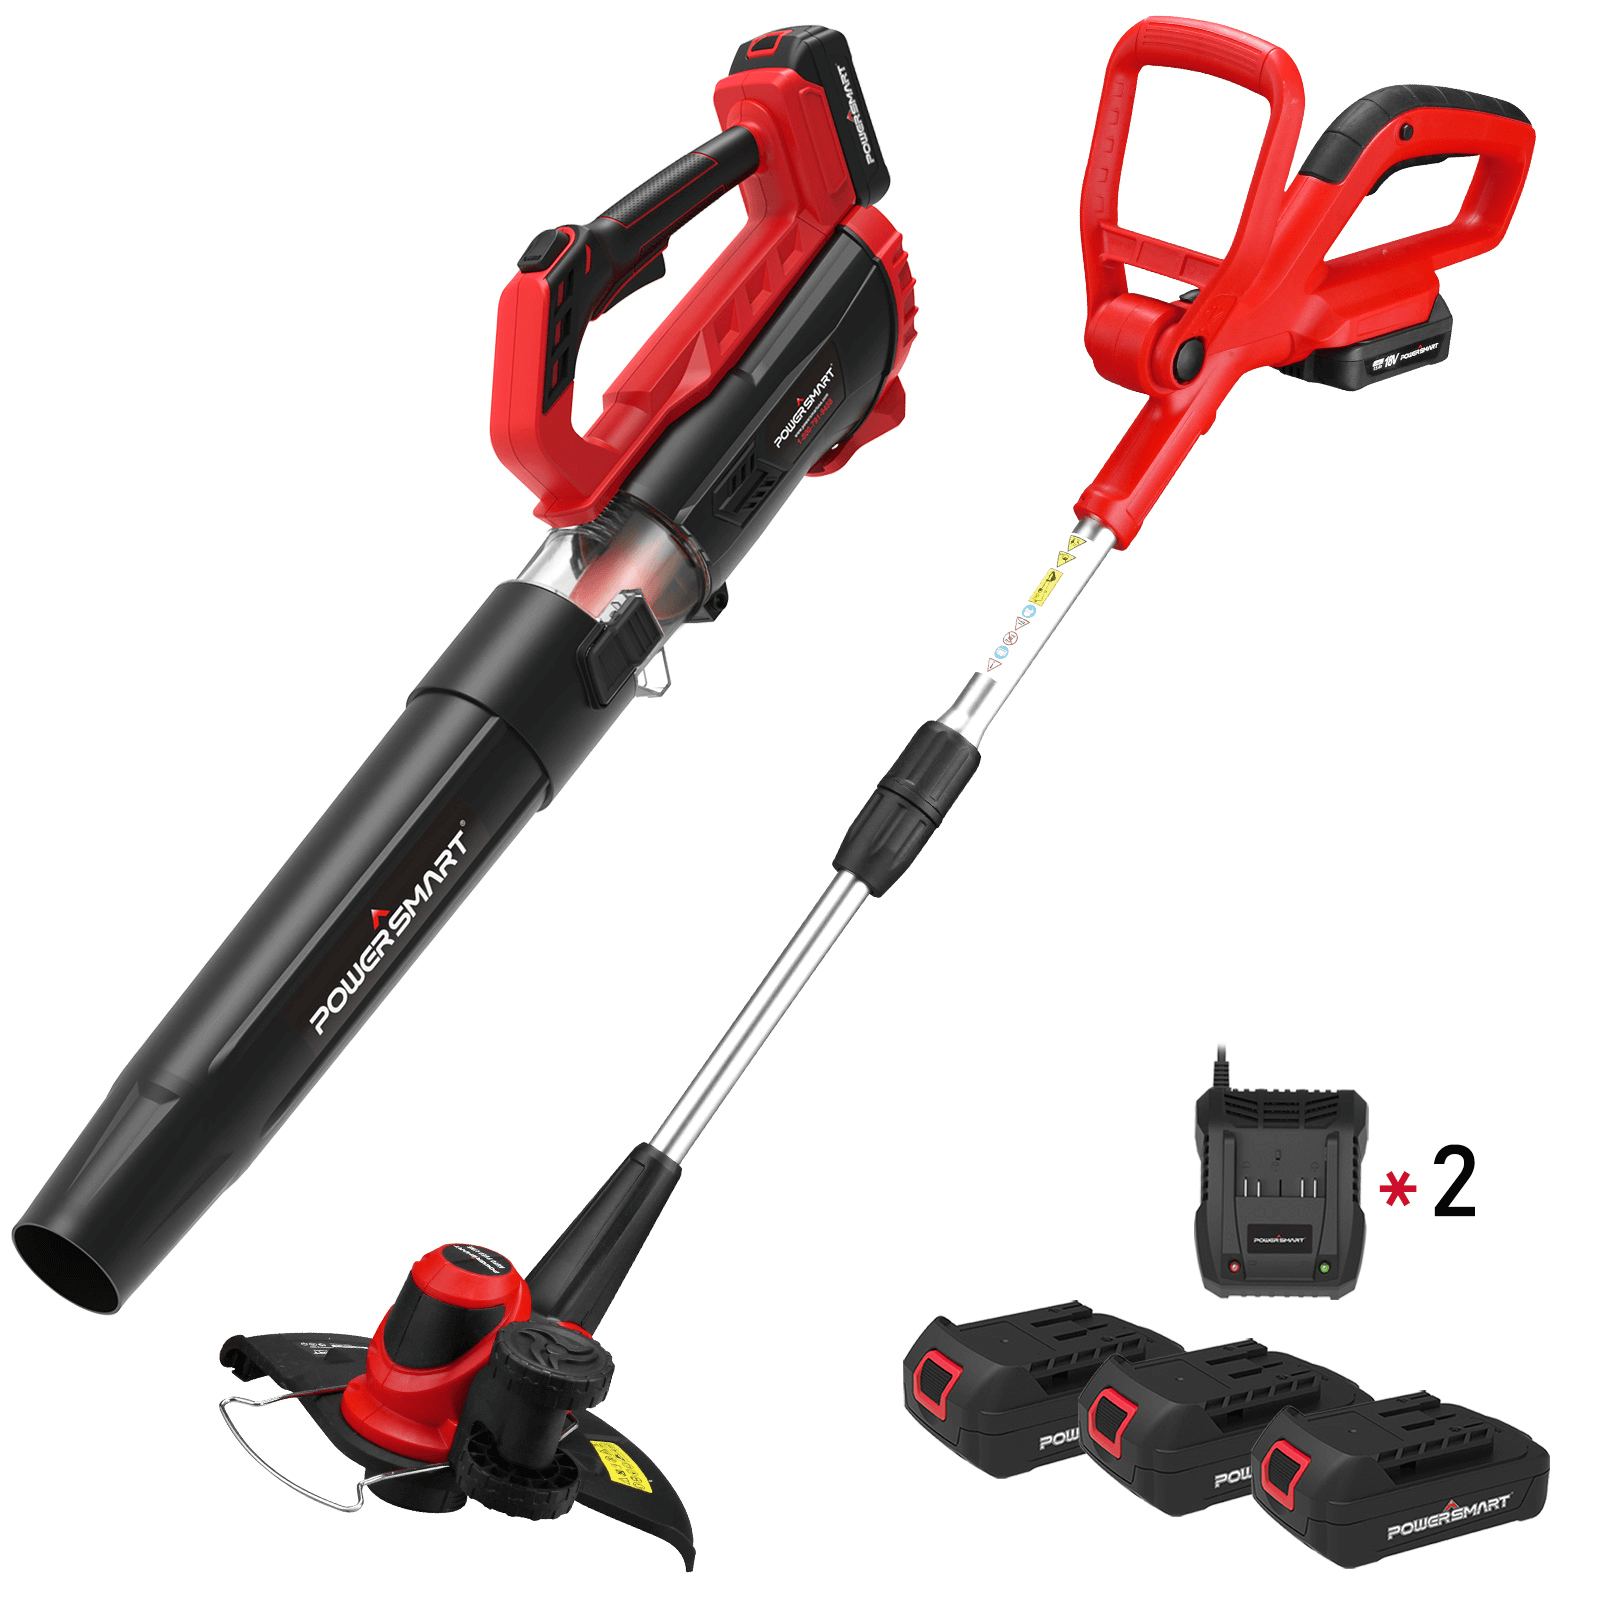 Black & Decker 8 pc. 20V Cordless Leaf Blower and Trimmer Combo